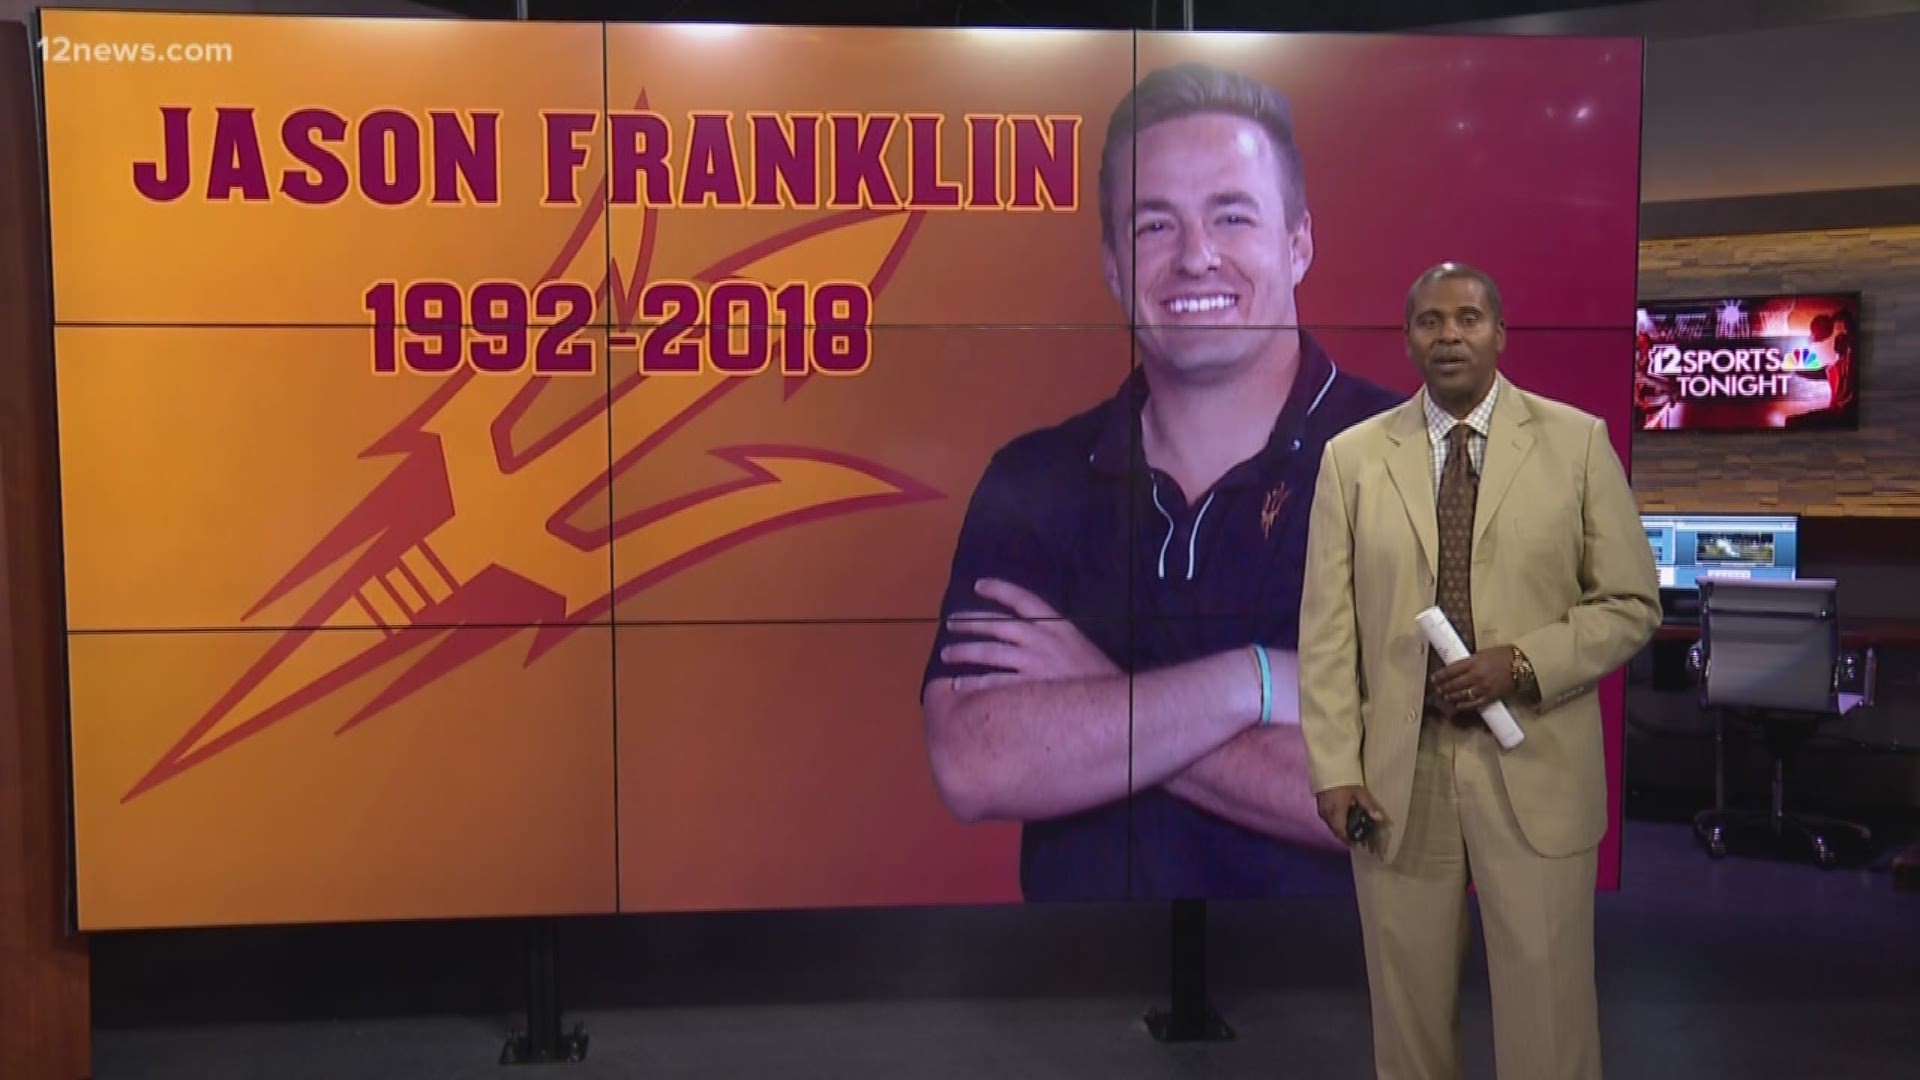 Jason Franklin passed on Saturday and spent most of his career as a leader on the scout team and served as a special correspondent on 12 Sports Tonight.